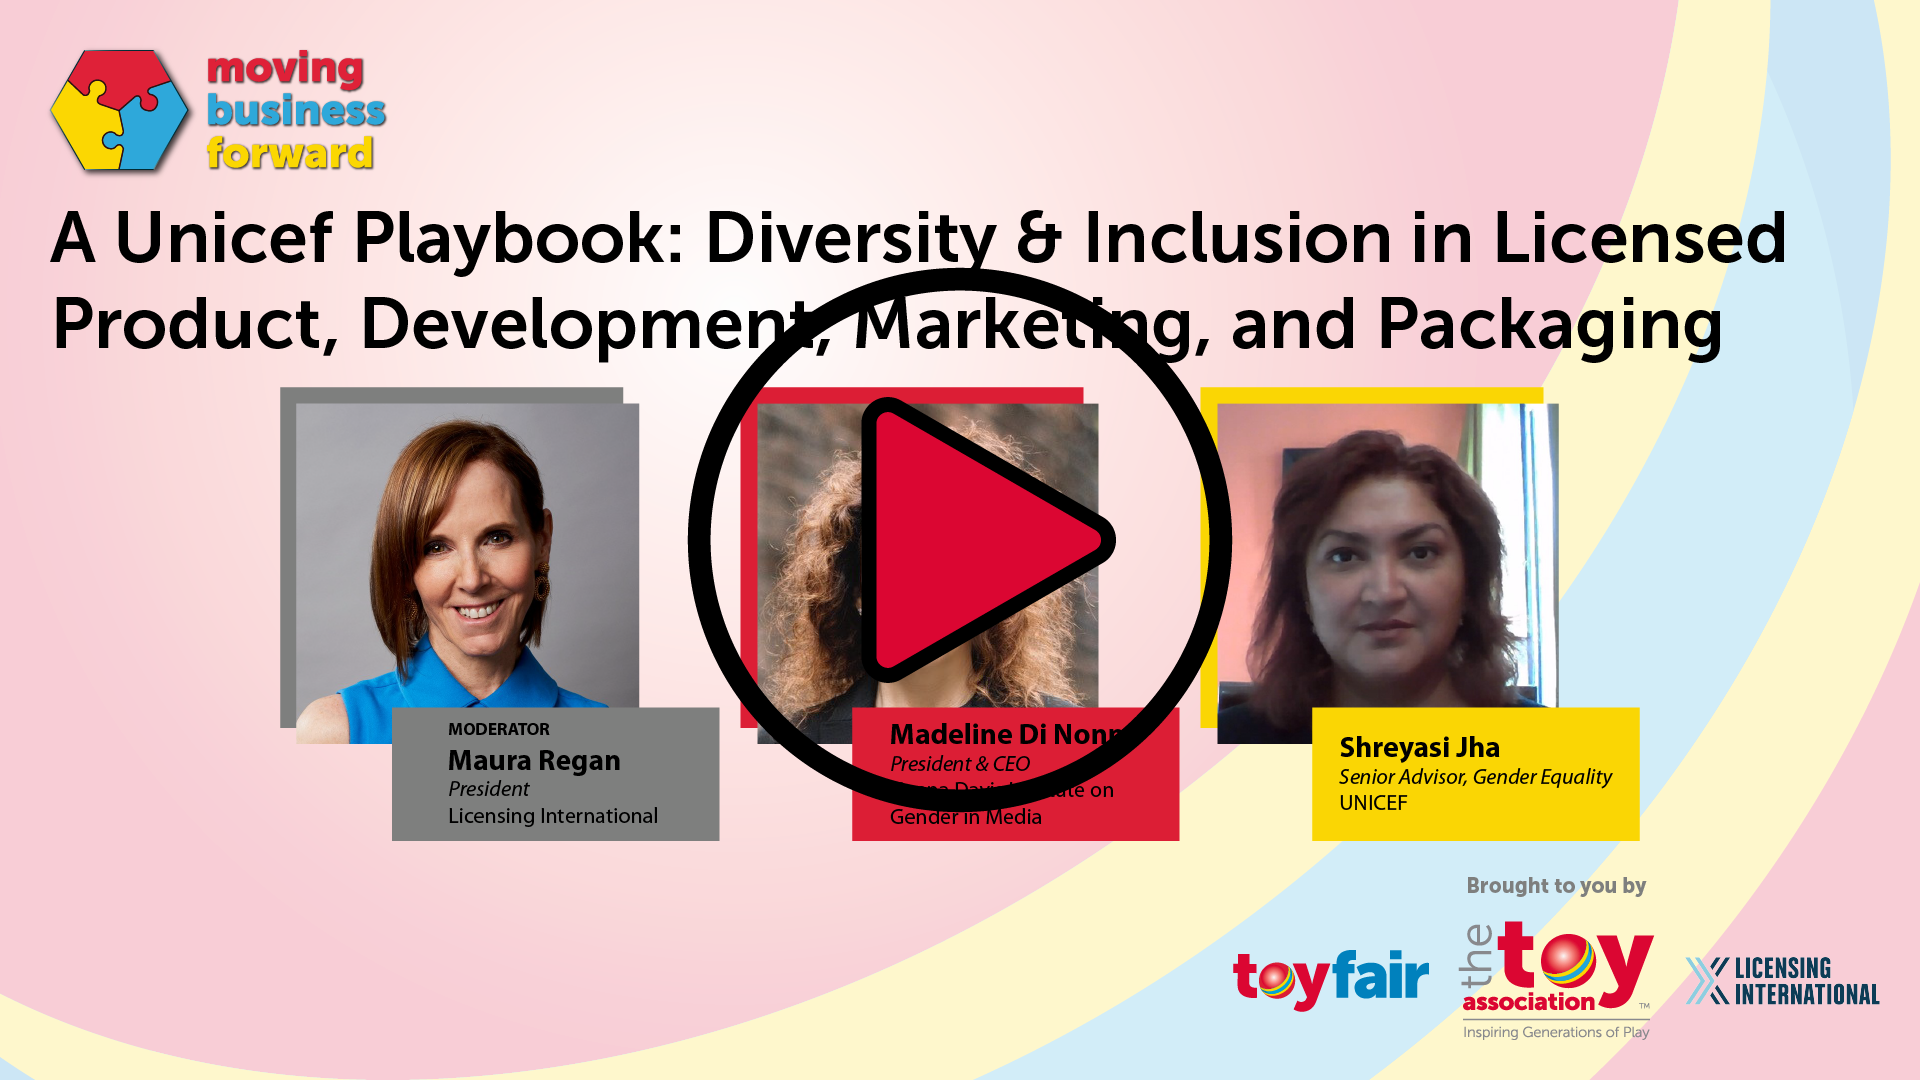 A UNICEF Playbook: Diversity & Inclusion in Licensed Product, Development, Marketing, and Packaging